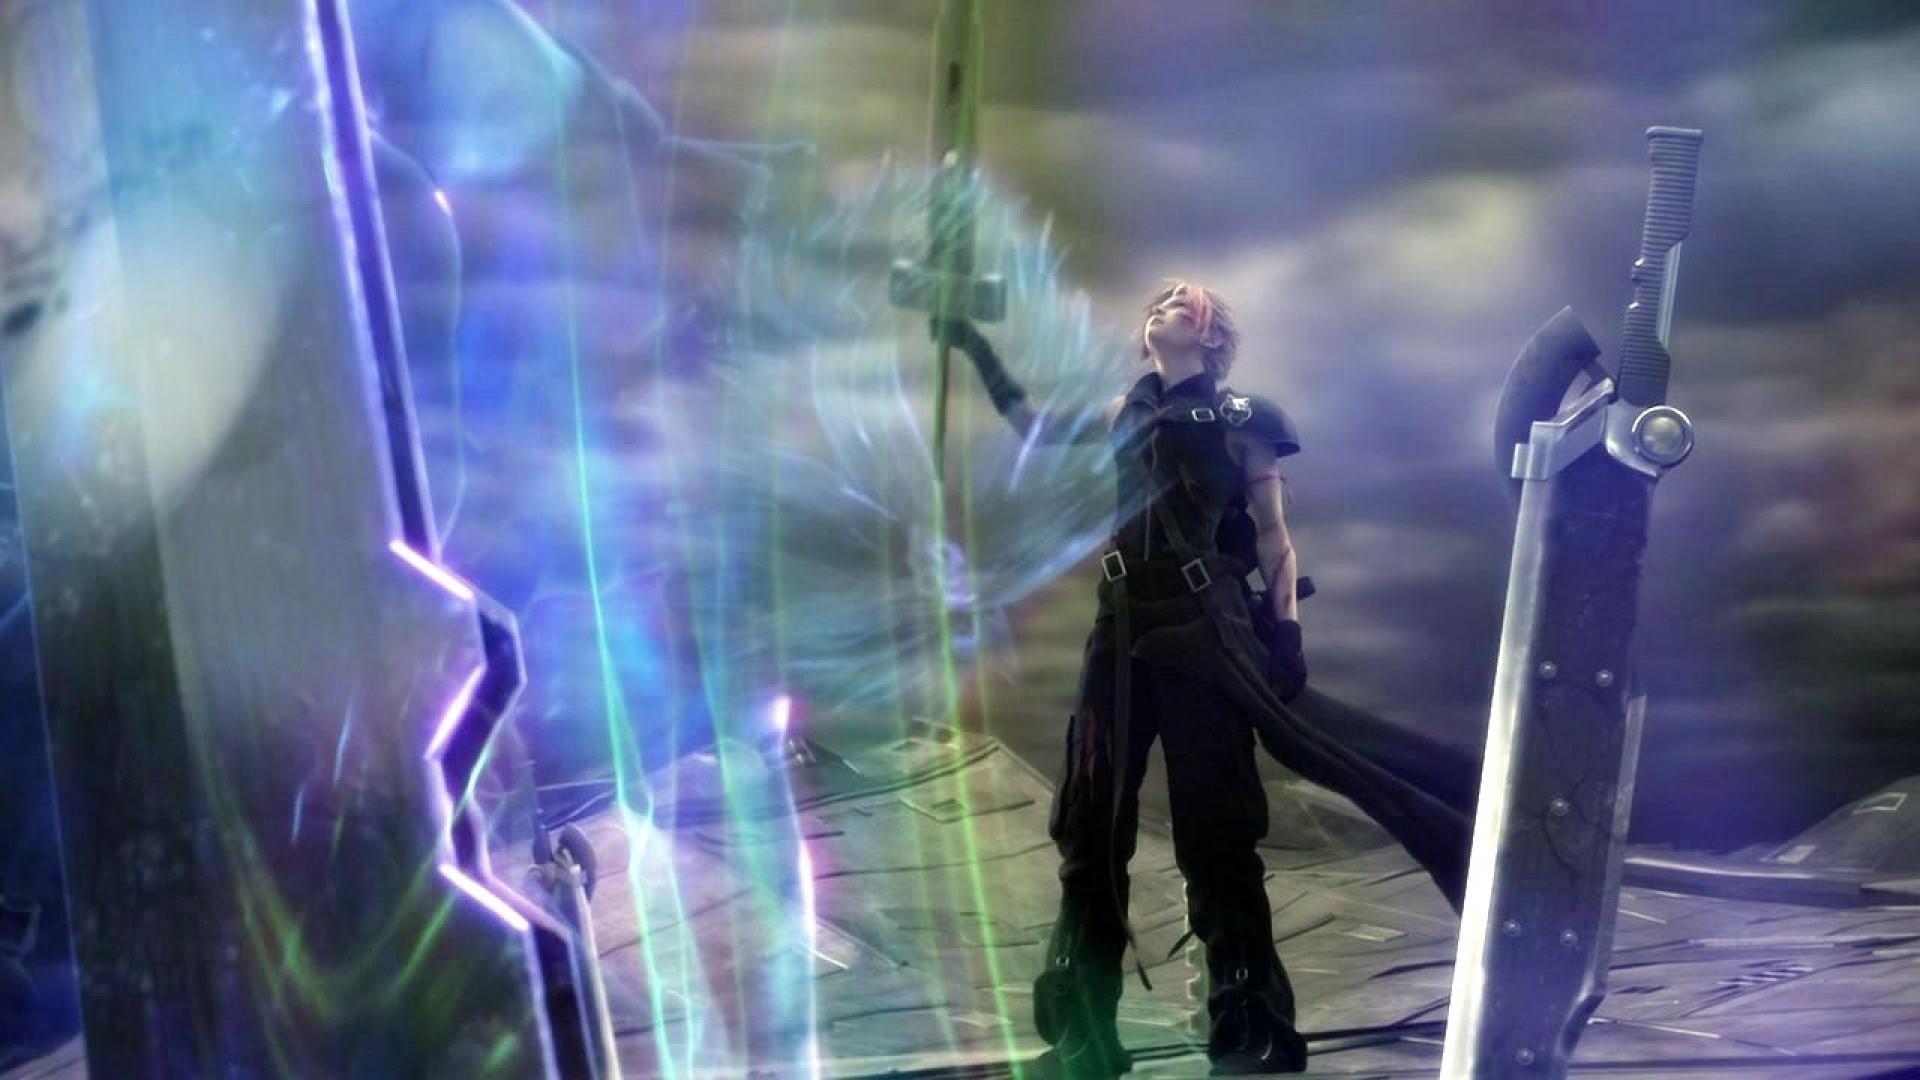 Cloud strife - (#83289) - High Quality and Resolution Wallpapers ...